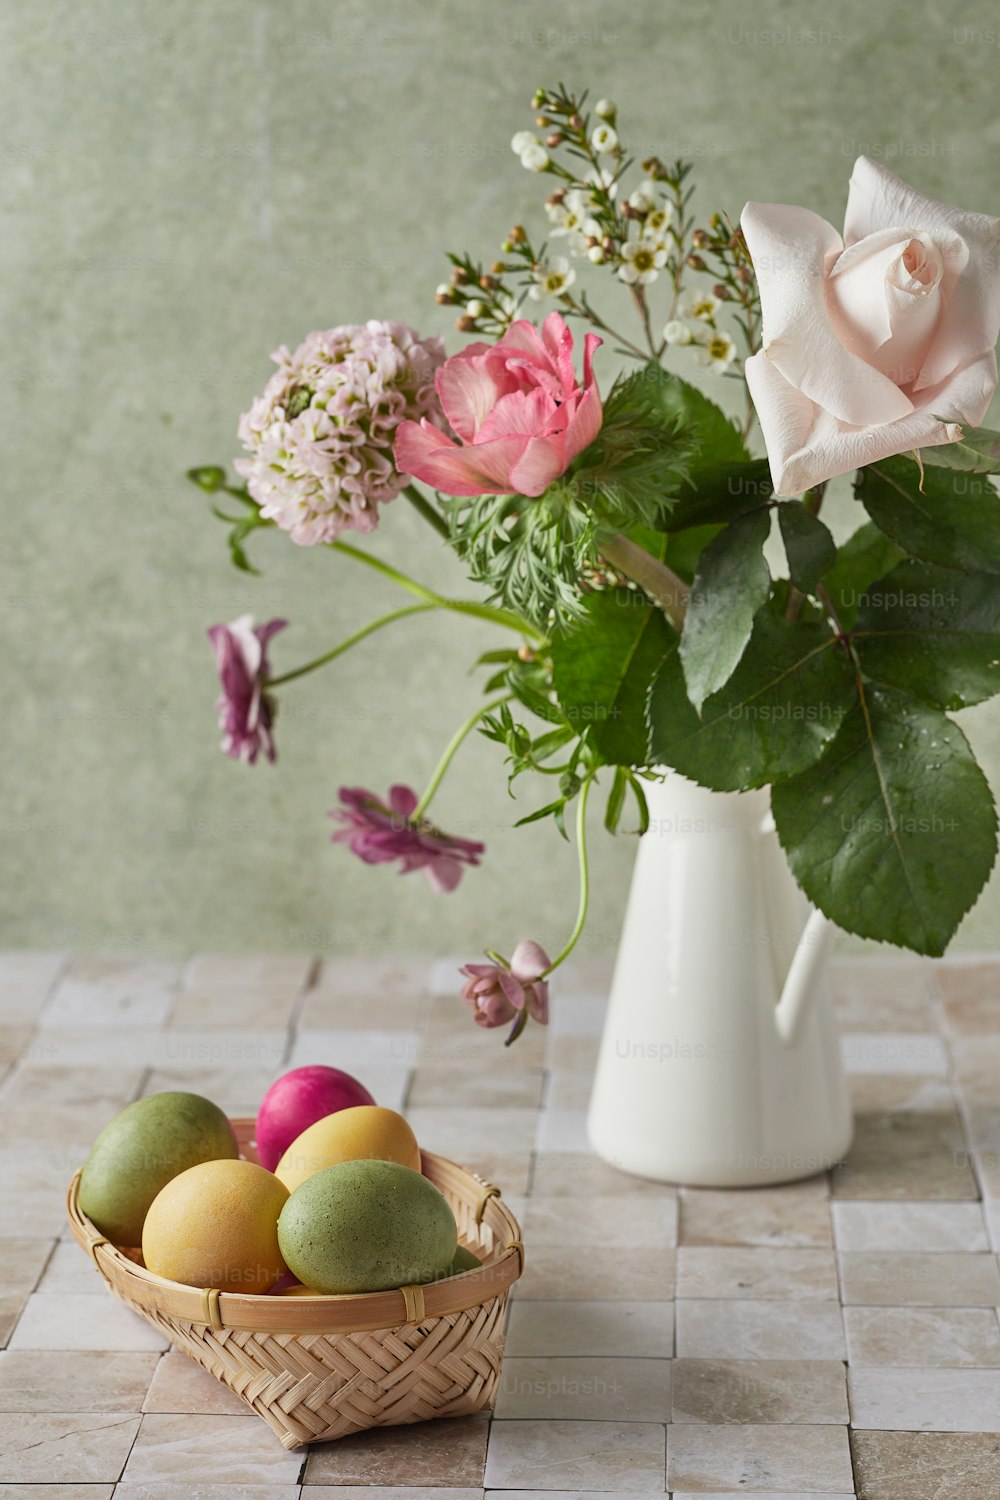 a basket of fruit next to a vase of flowers